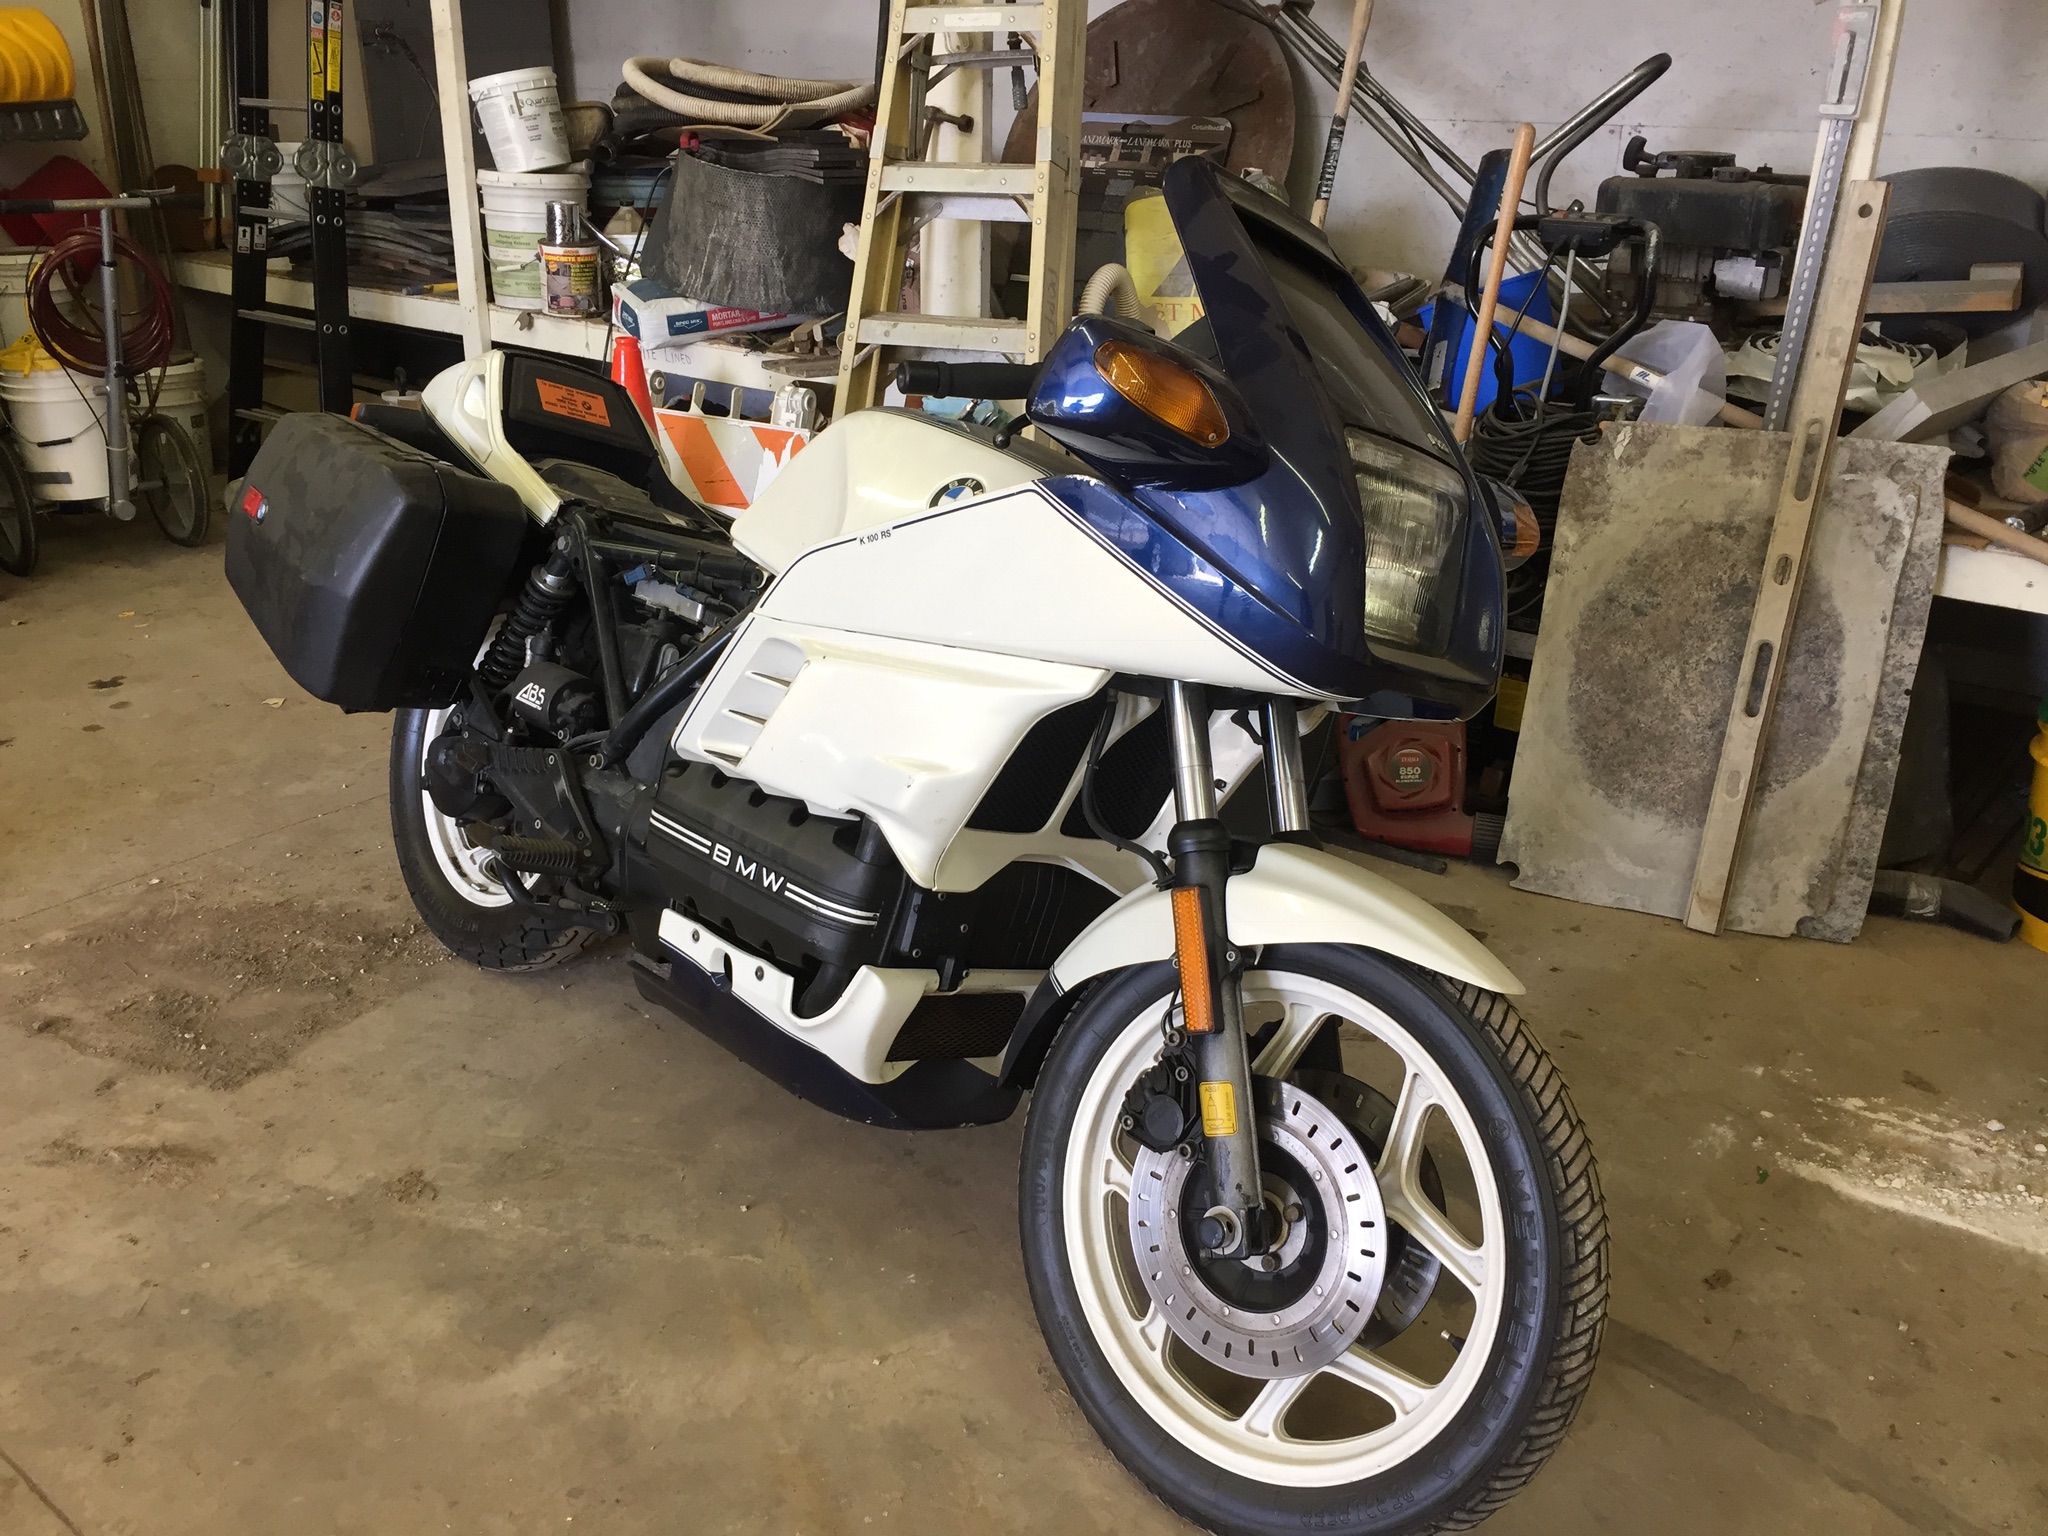 New to BMW and fixing bikes 9dc70910